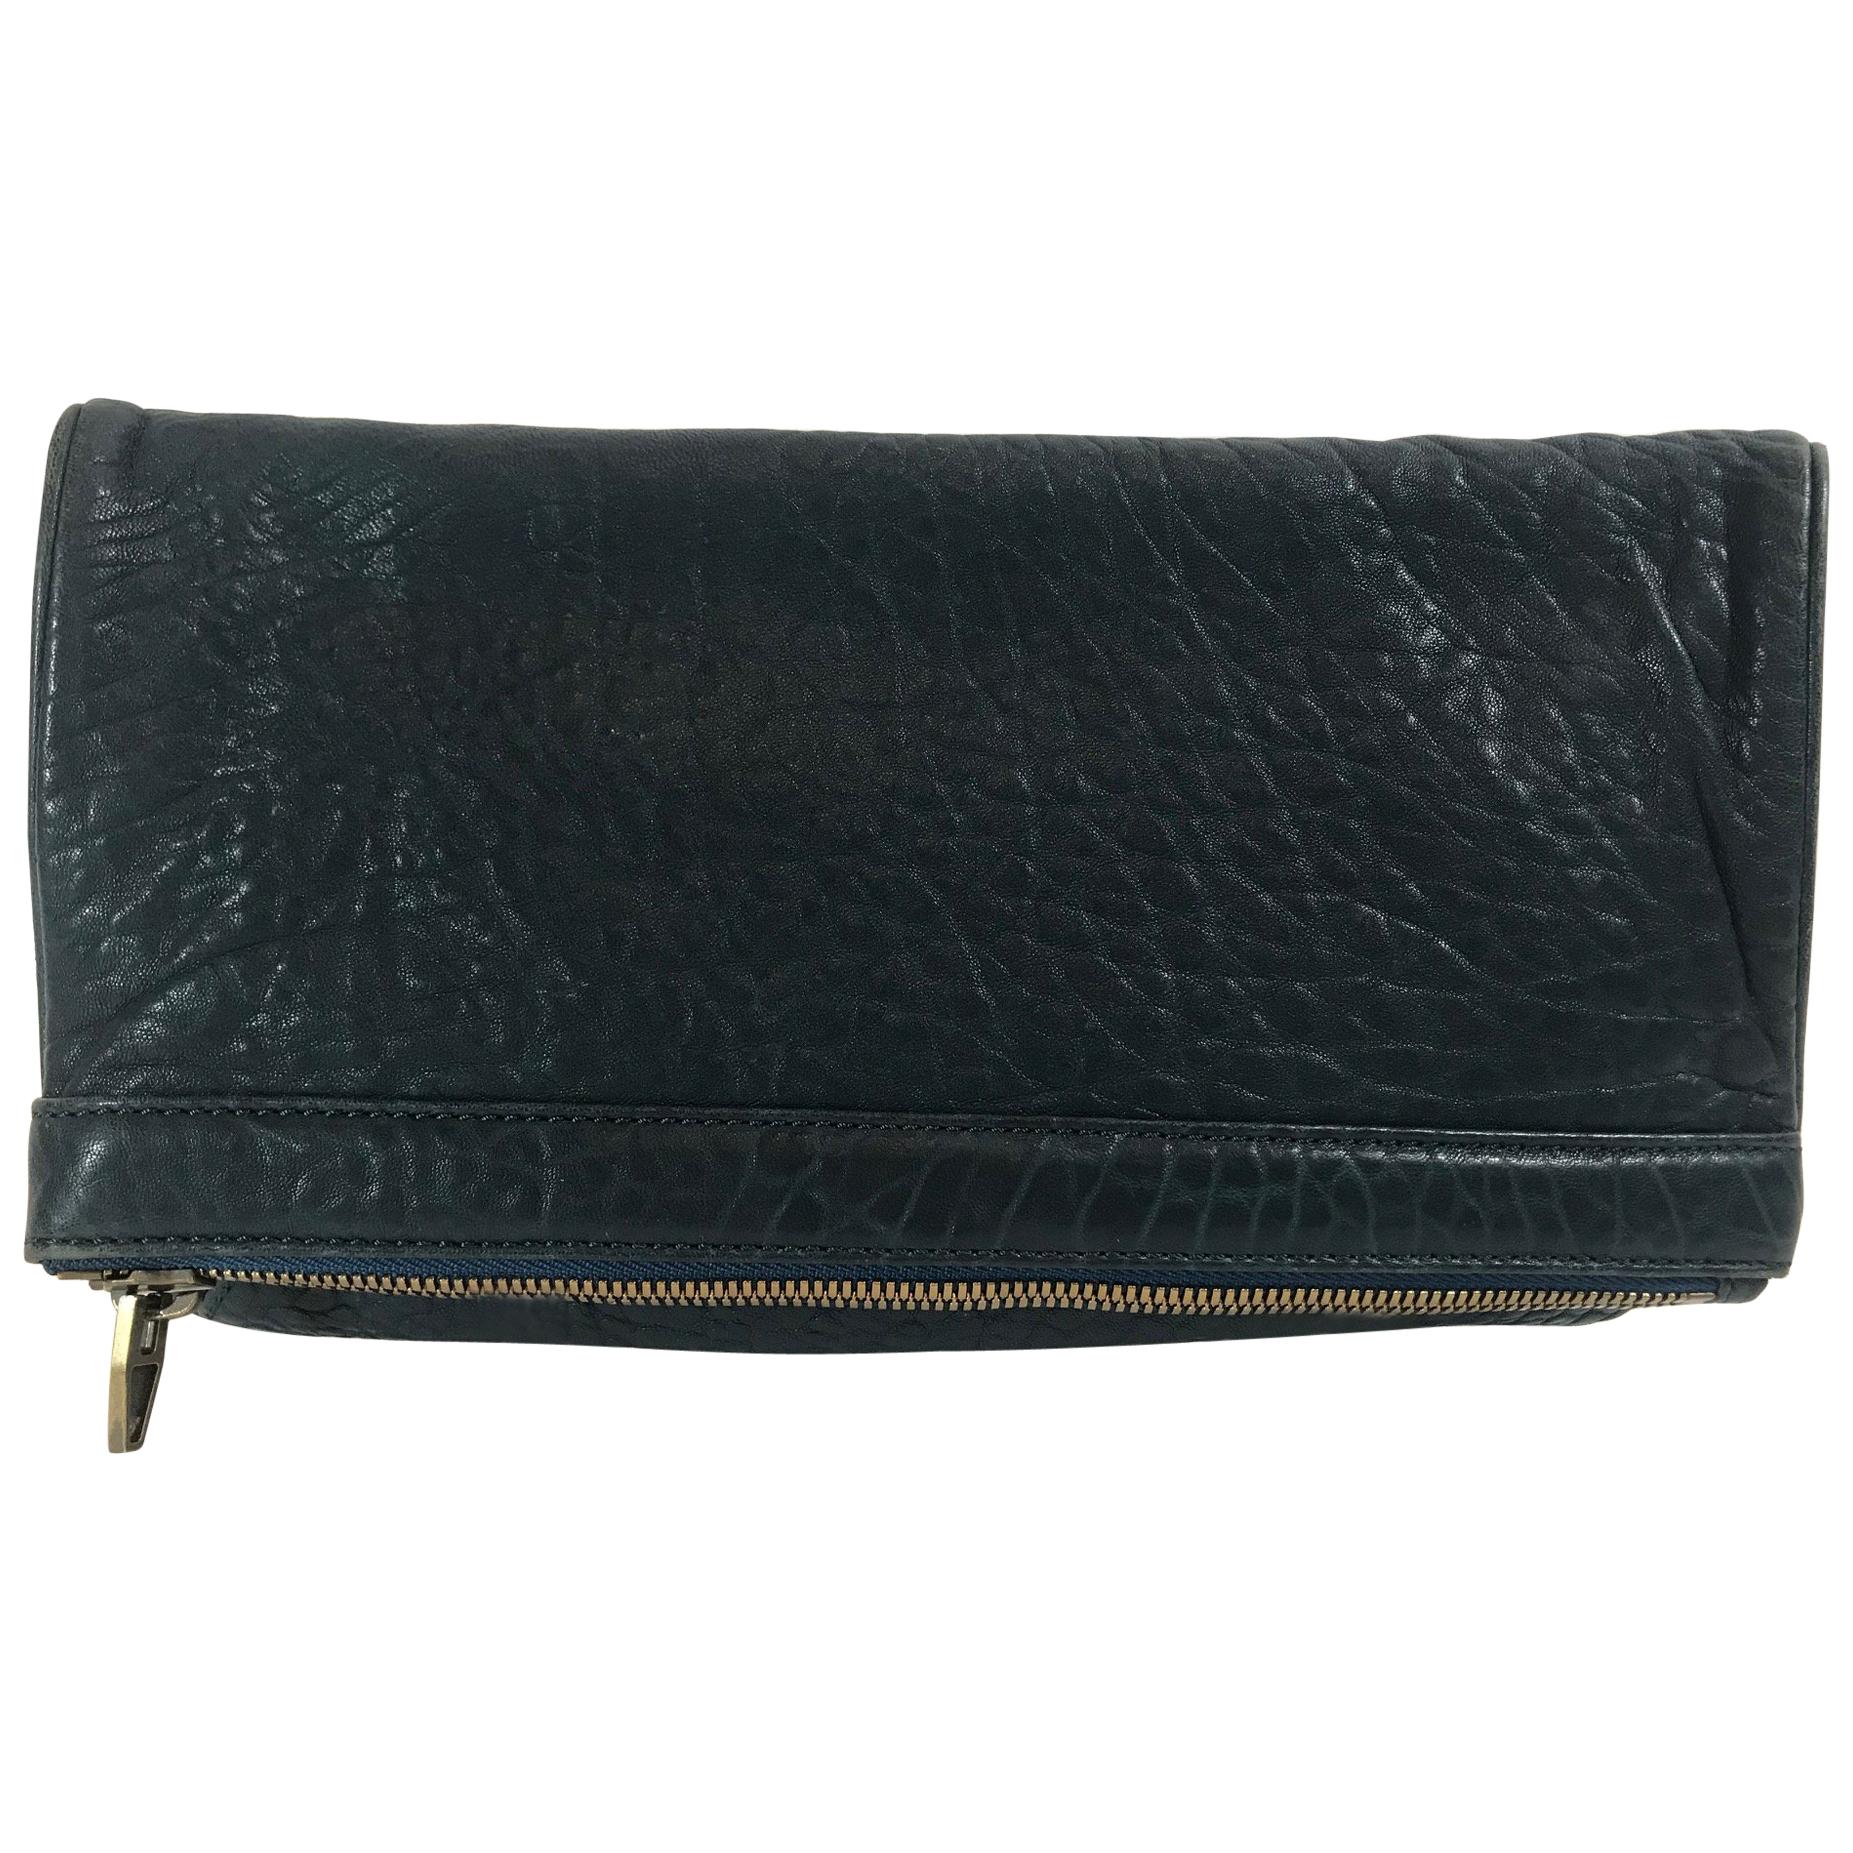 Alexander Wang Dumbo Fold-Over Clutch For Sale